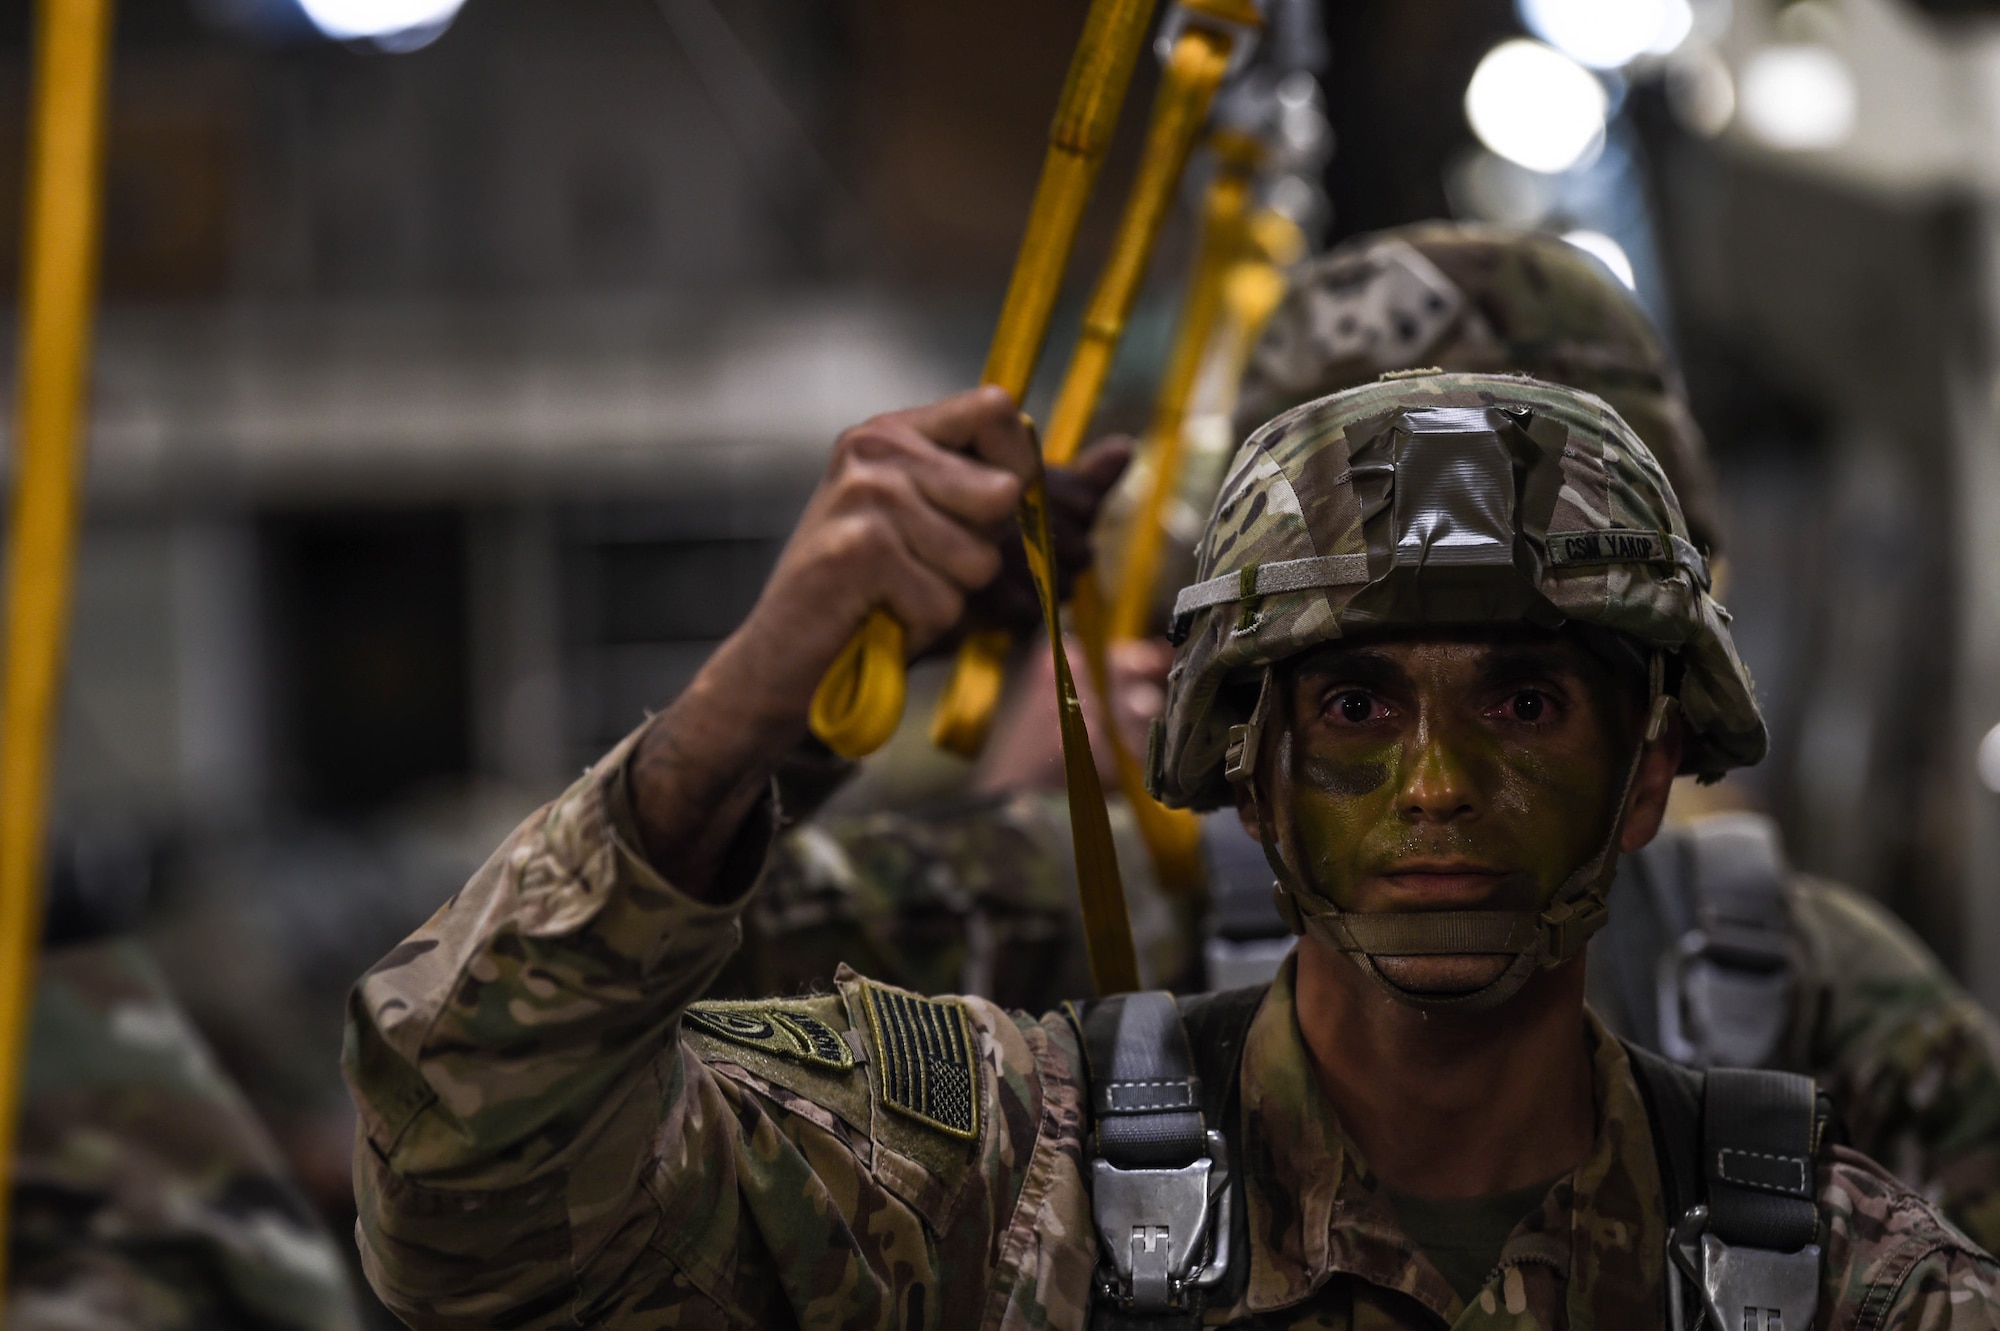 An 82nd Airborne Division paratroopers waits to jump out of a C-17 Globemaster III from McChord Field, Wash., during Exercise Predictable Iron near Pope Field, N.C., Aug. 21, 2018. Airmen from the 62nd Airlift Wing worked with the paratroopers during the exercise to help them maintain their airborne readiness requirements. (U.S. Air Force photo by Senior Airman Tryphena Mayhugh)